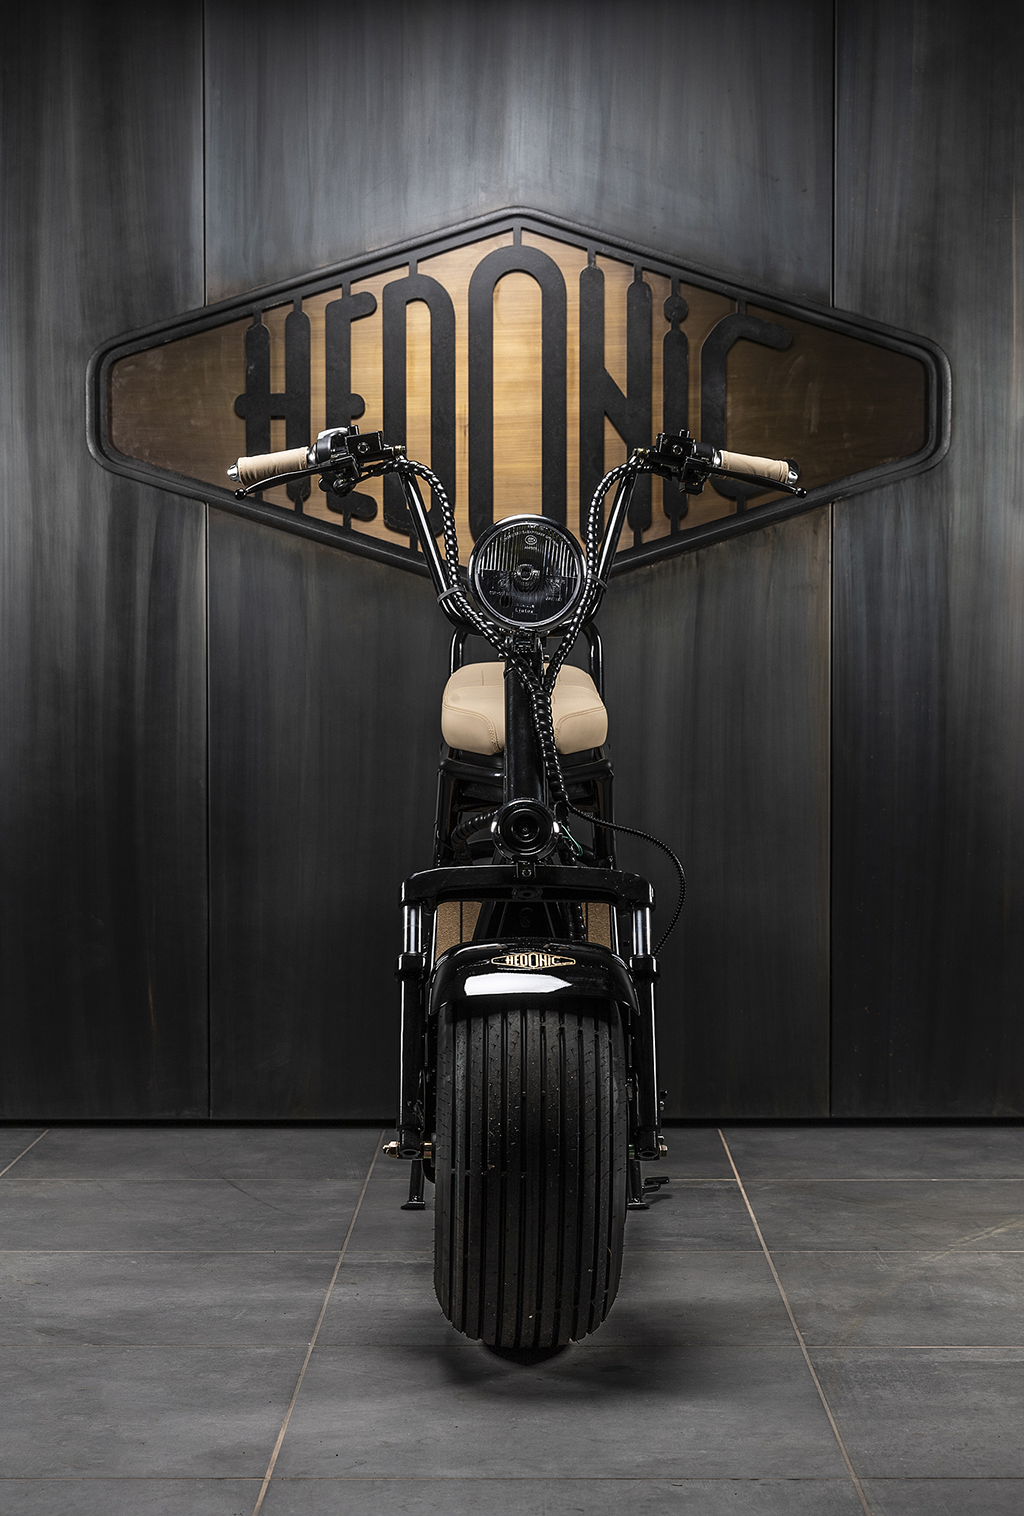 Black electric scooter